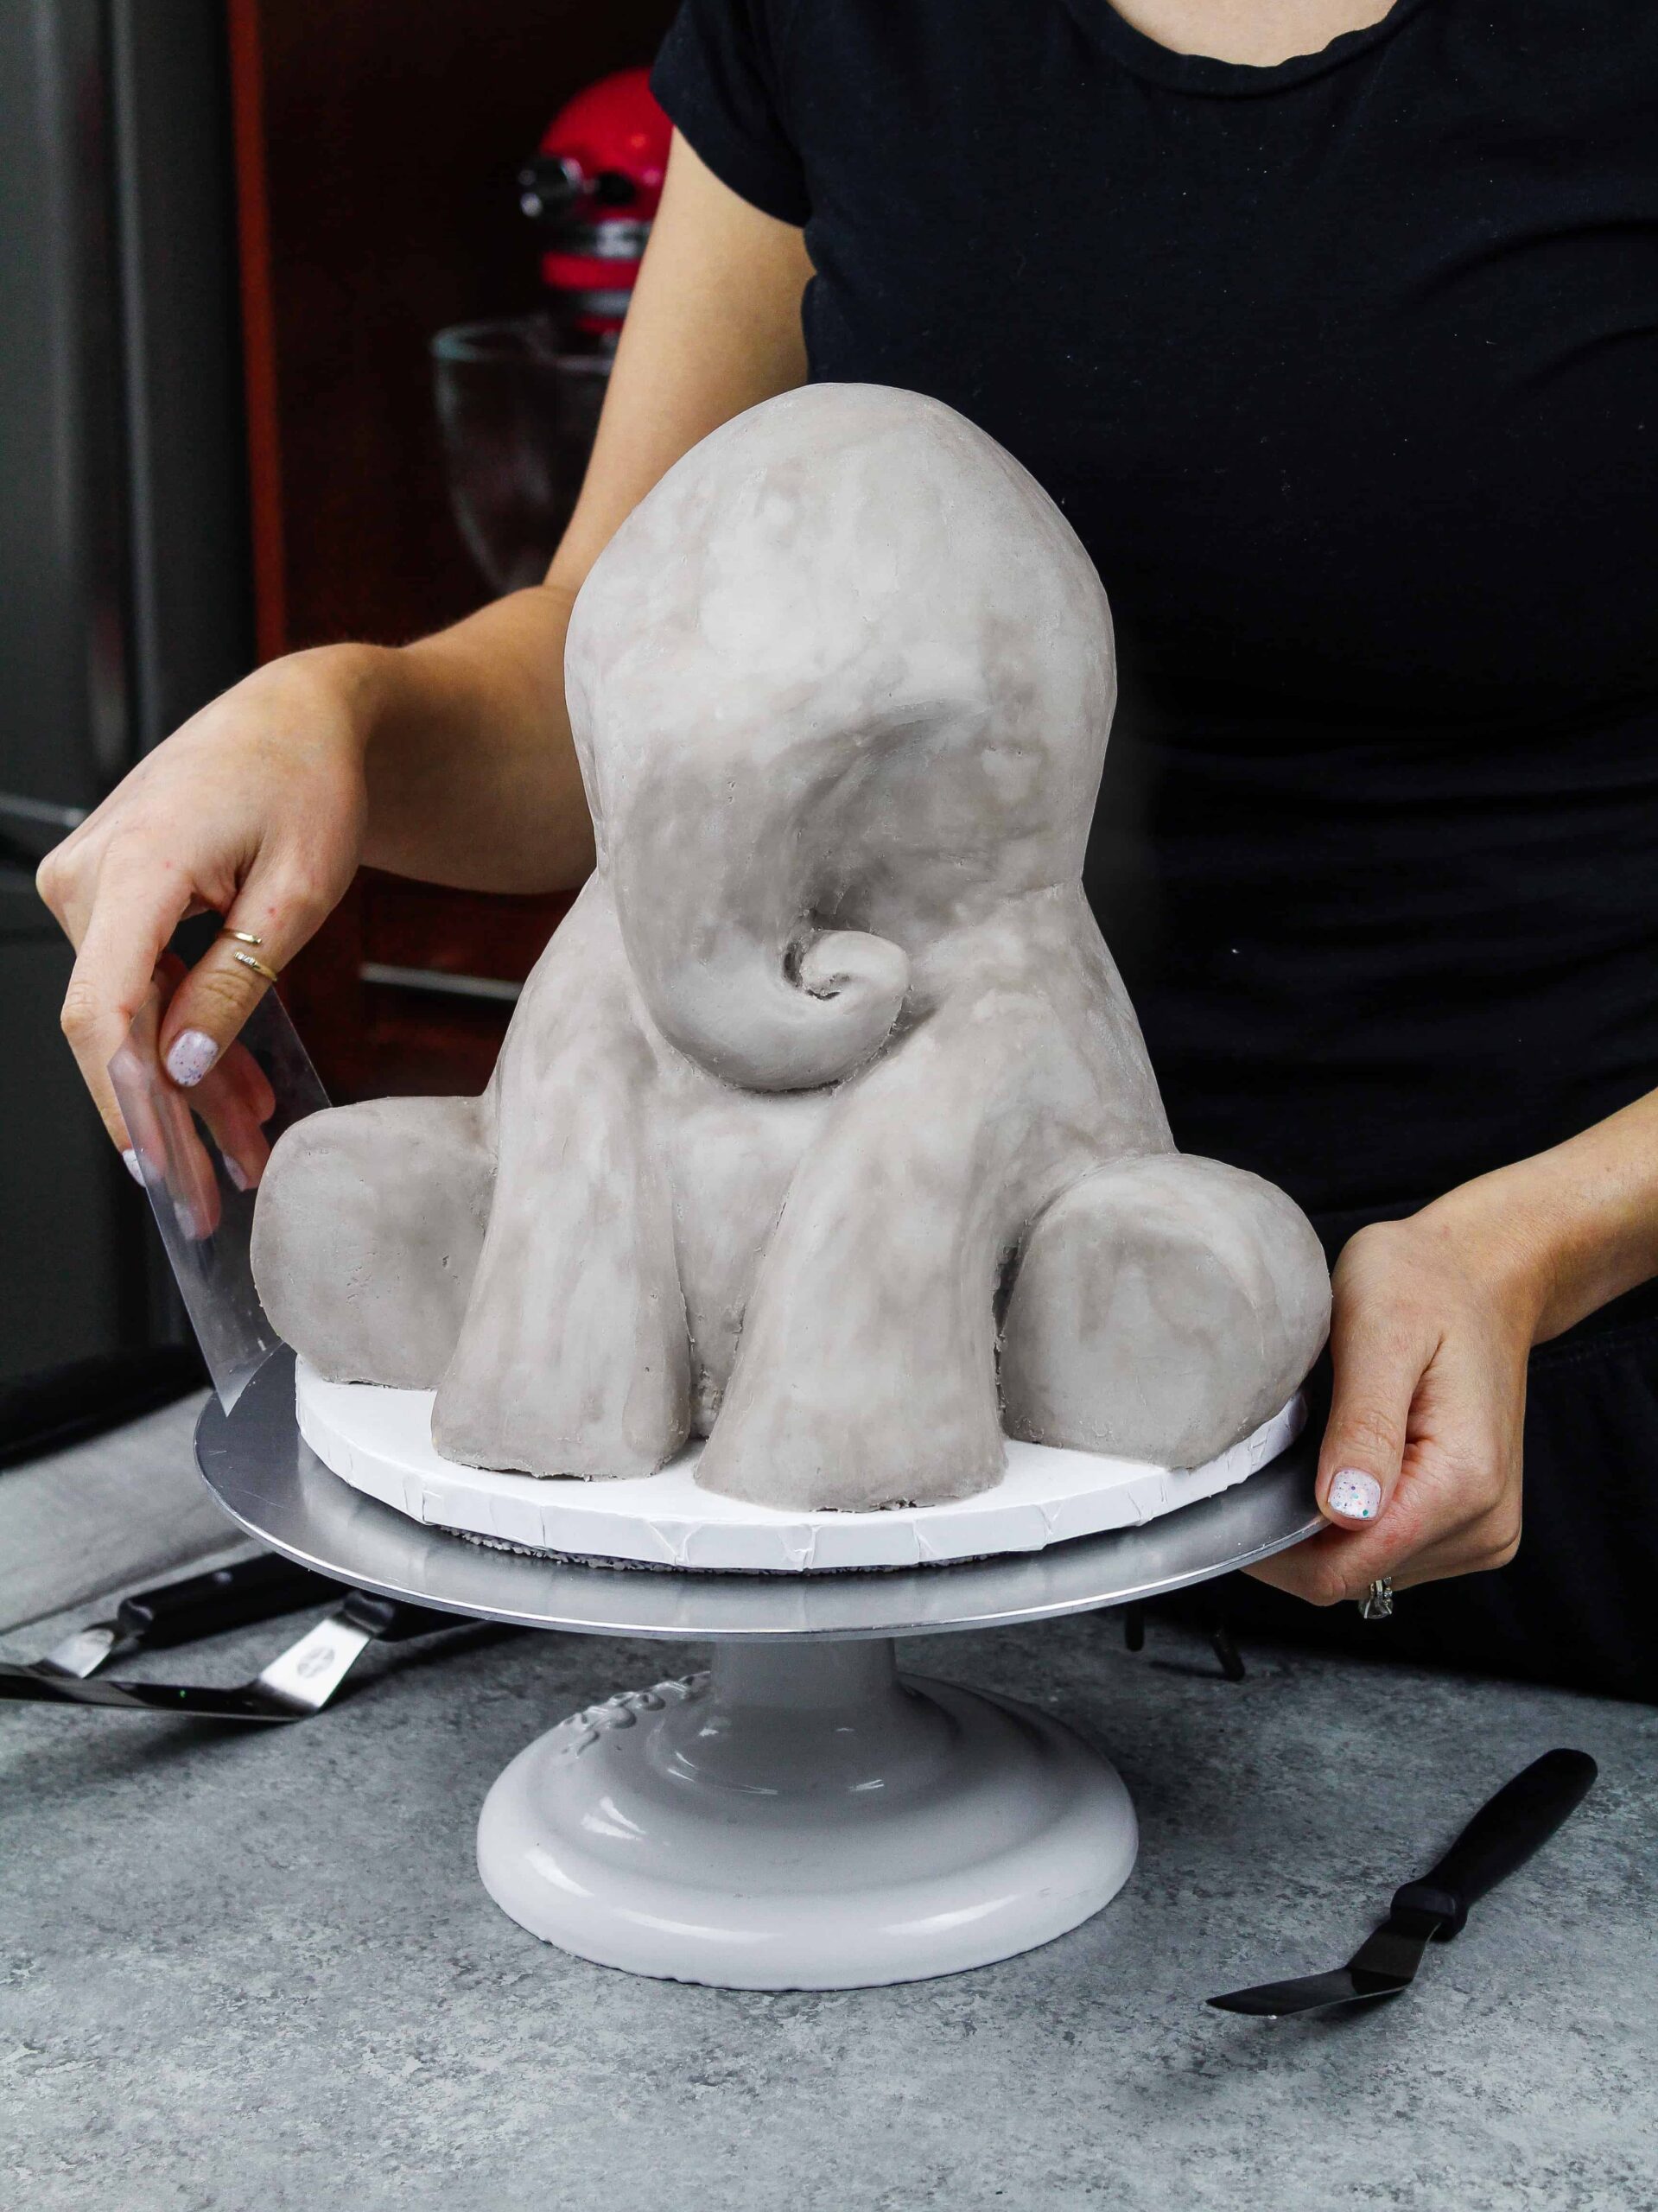 image of an elephant cake being frosted with naturally grey buttercream frosting